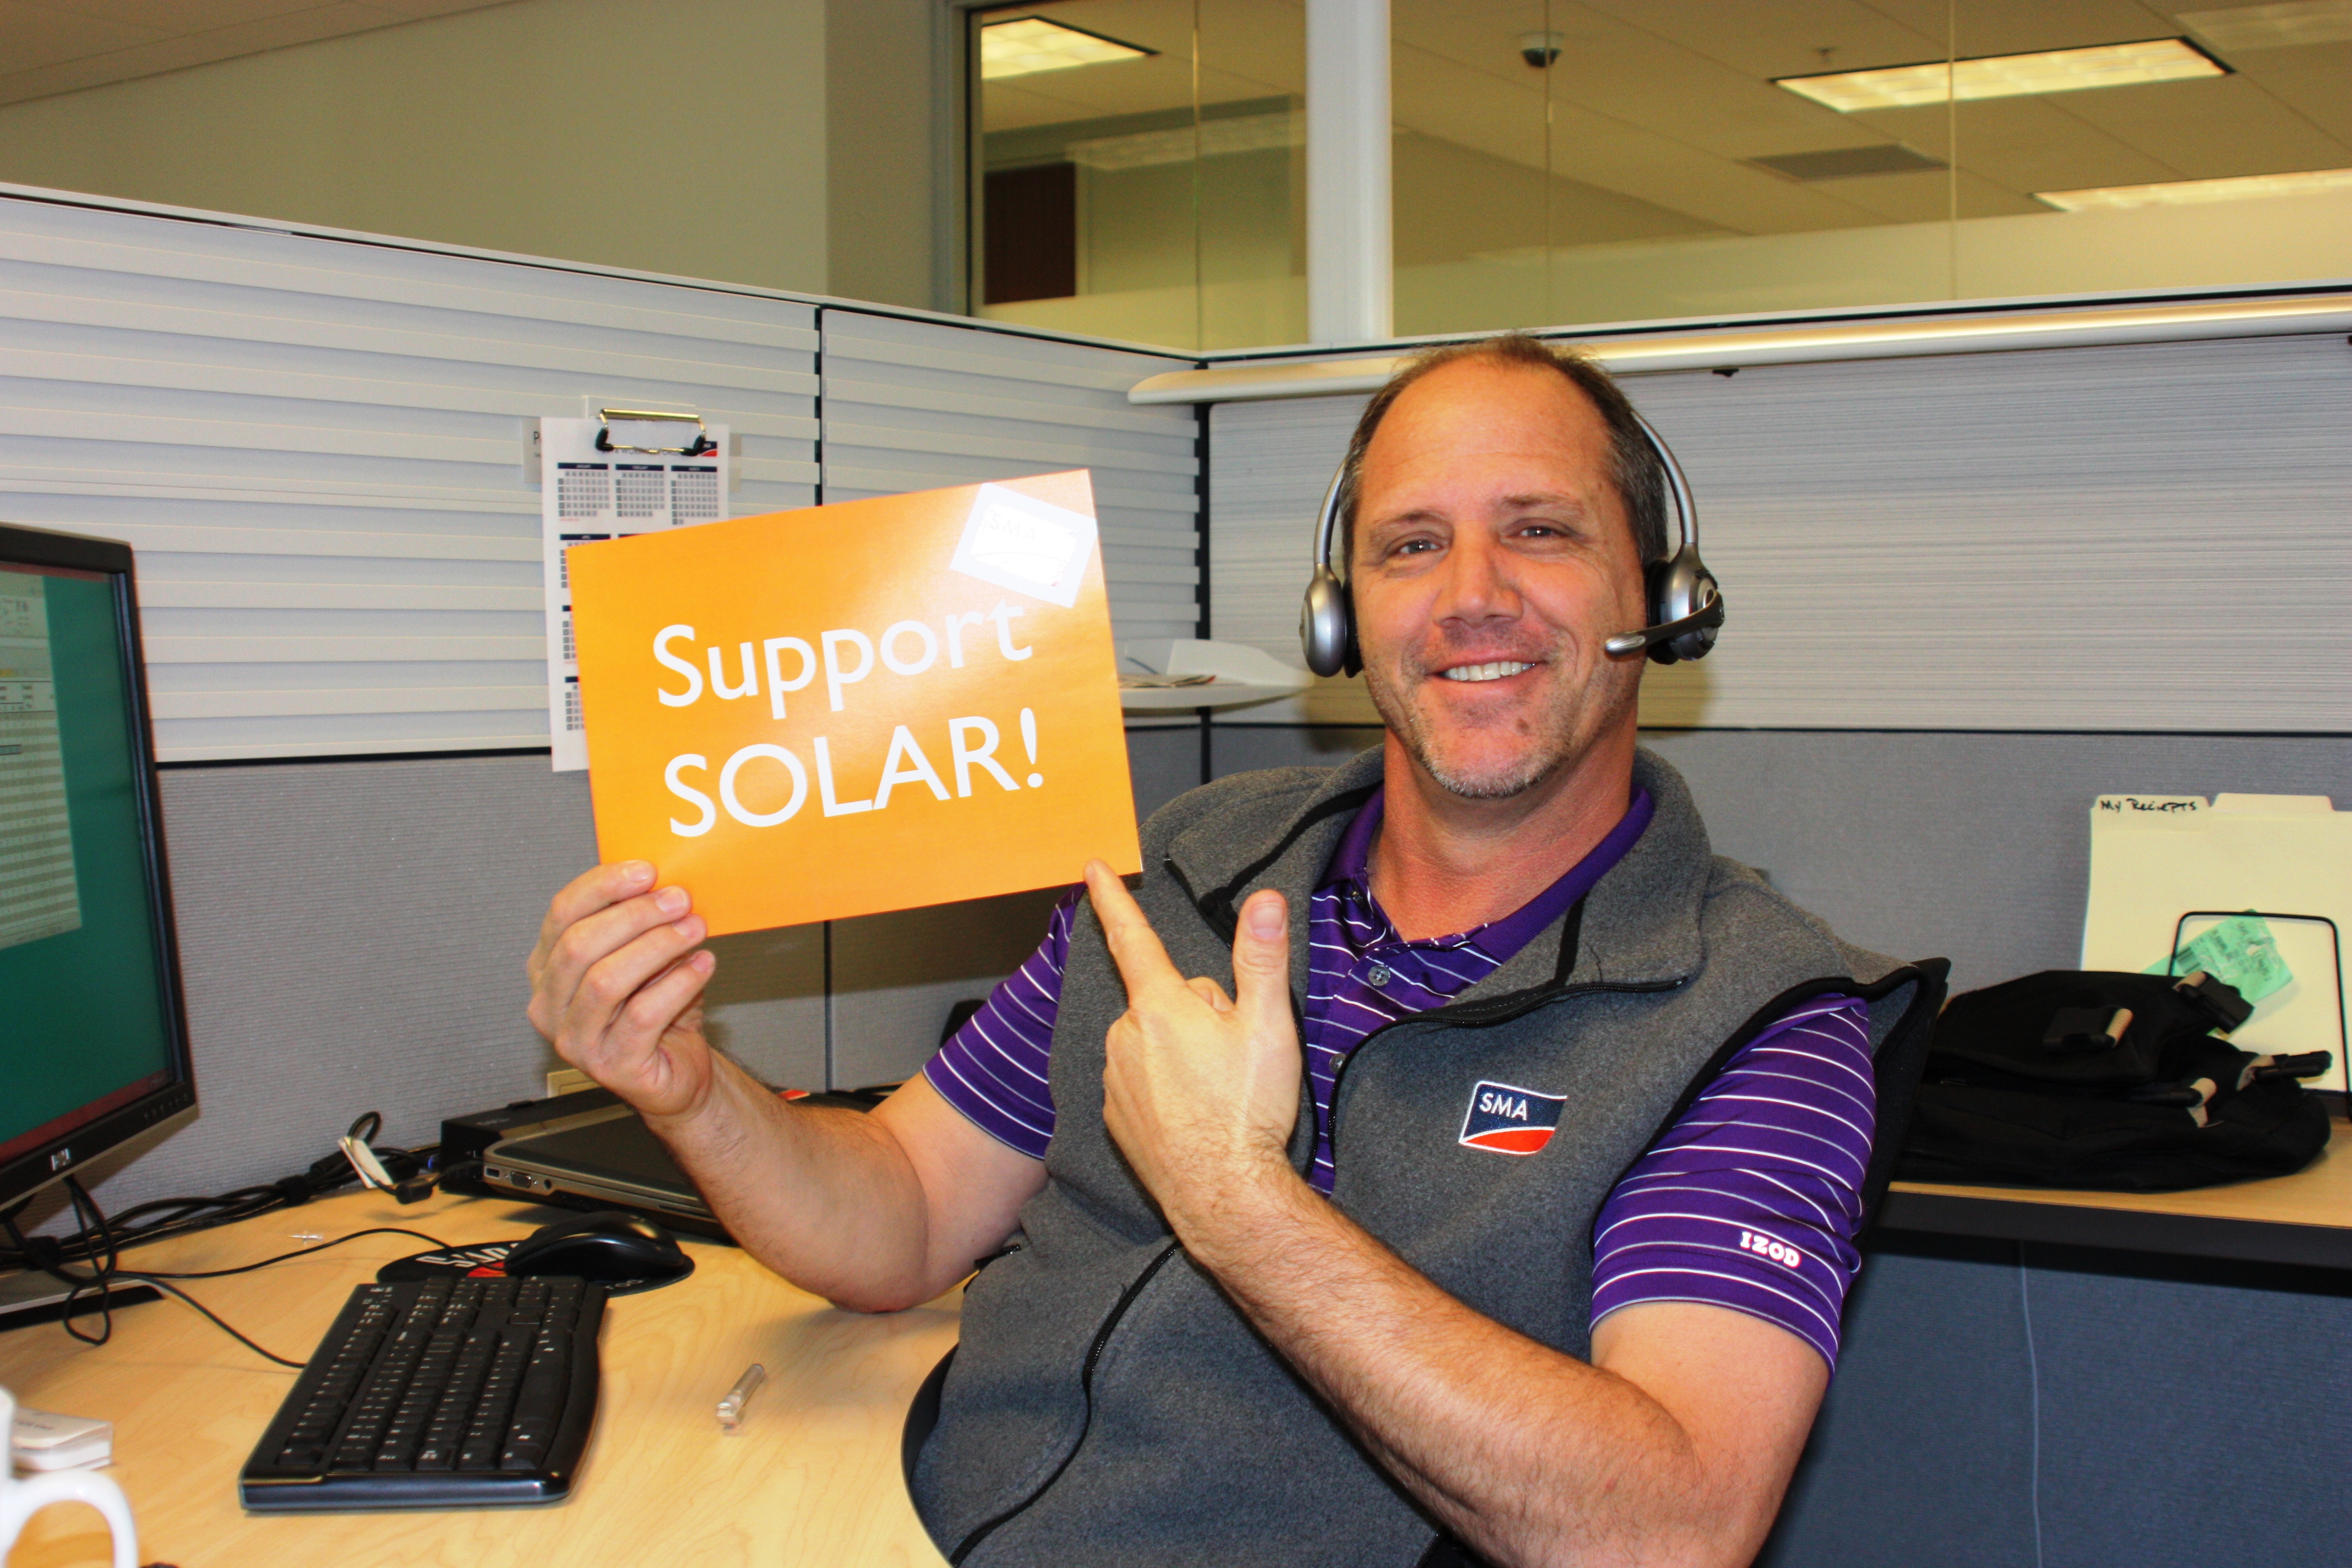 Paul Bouchard, SMA Service Sales, is proud to support solar!